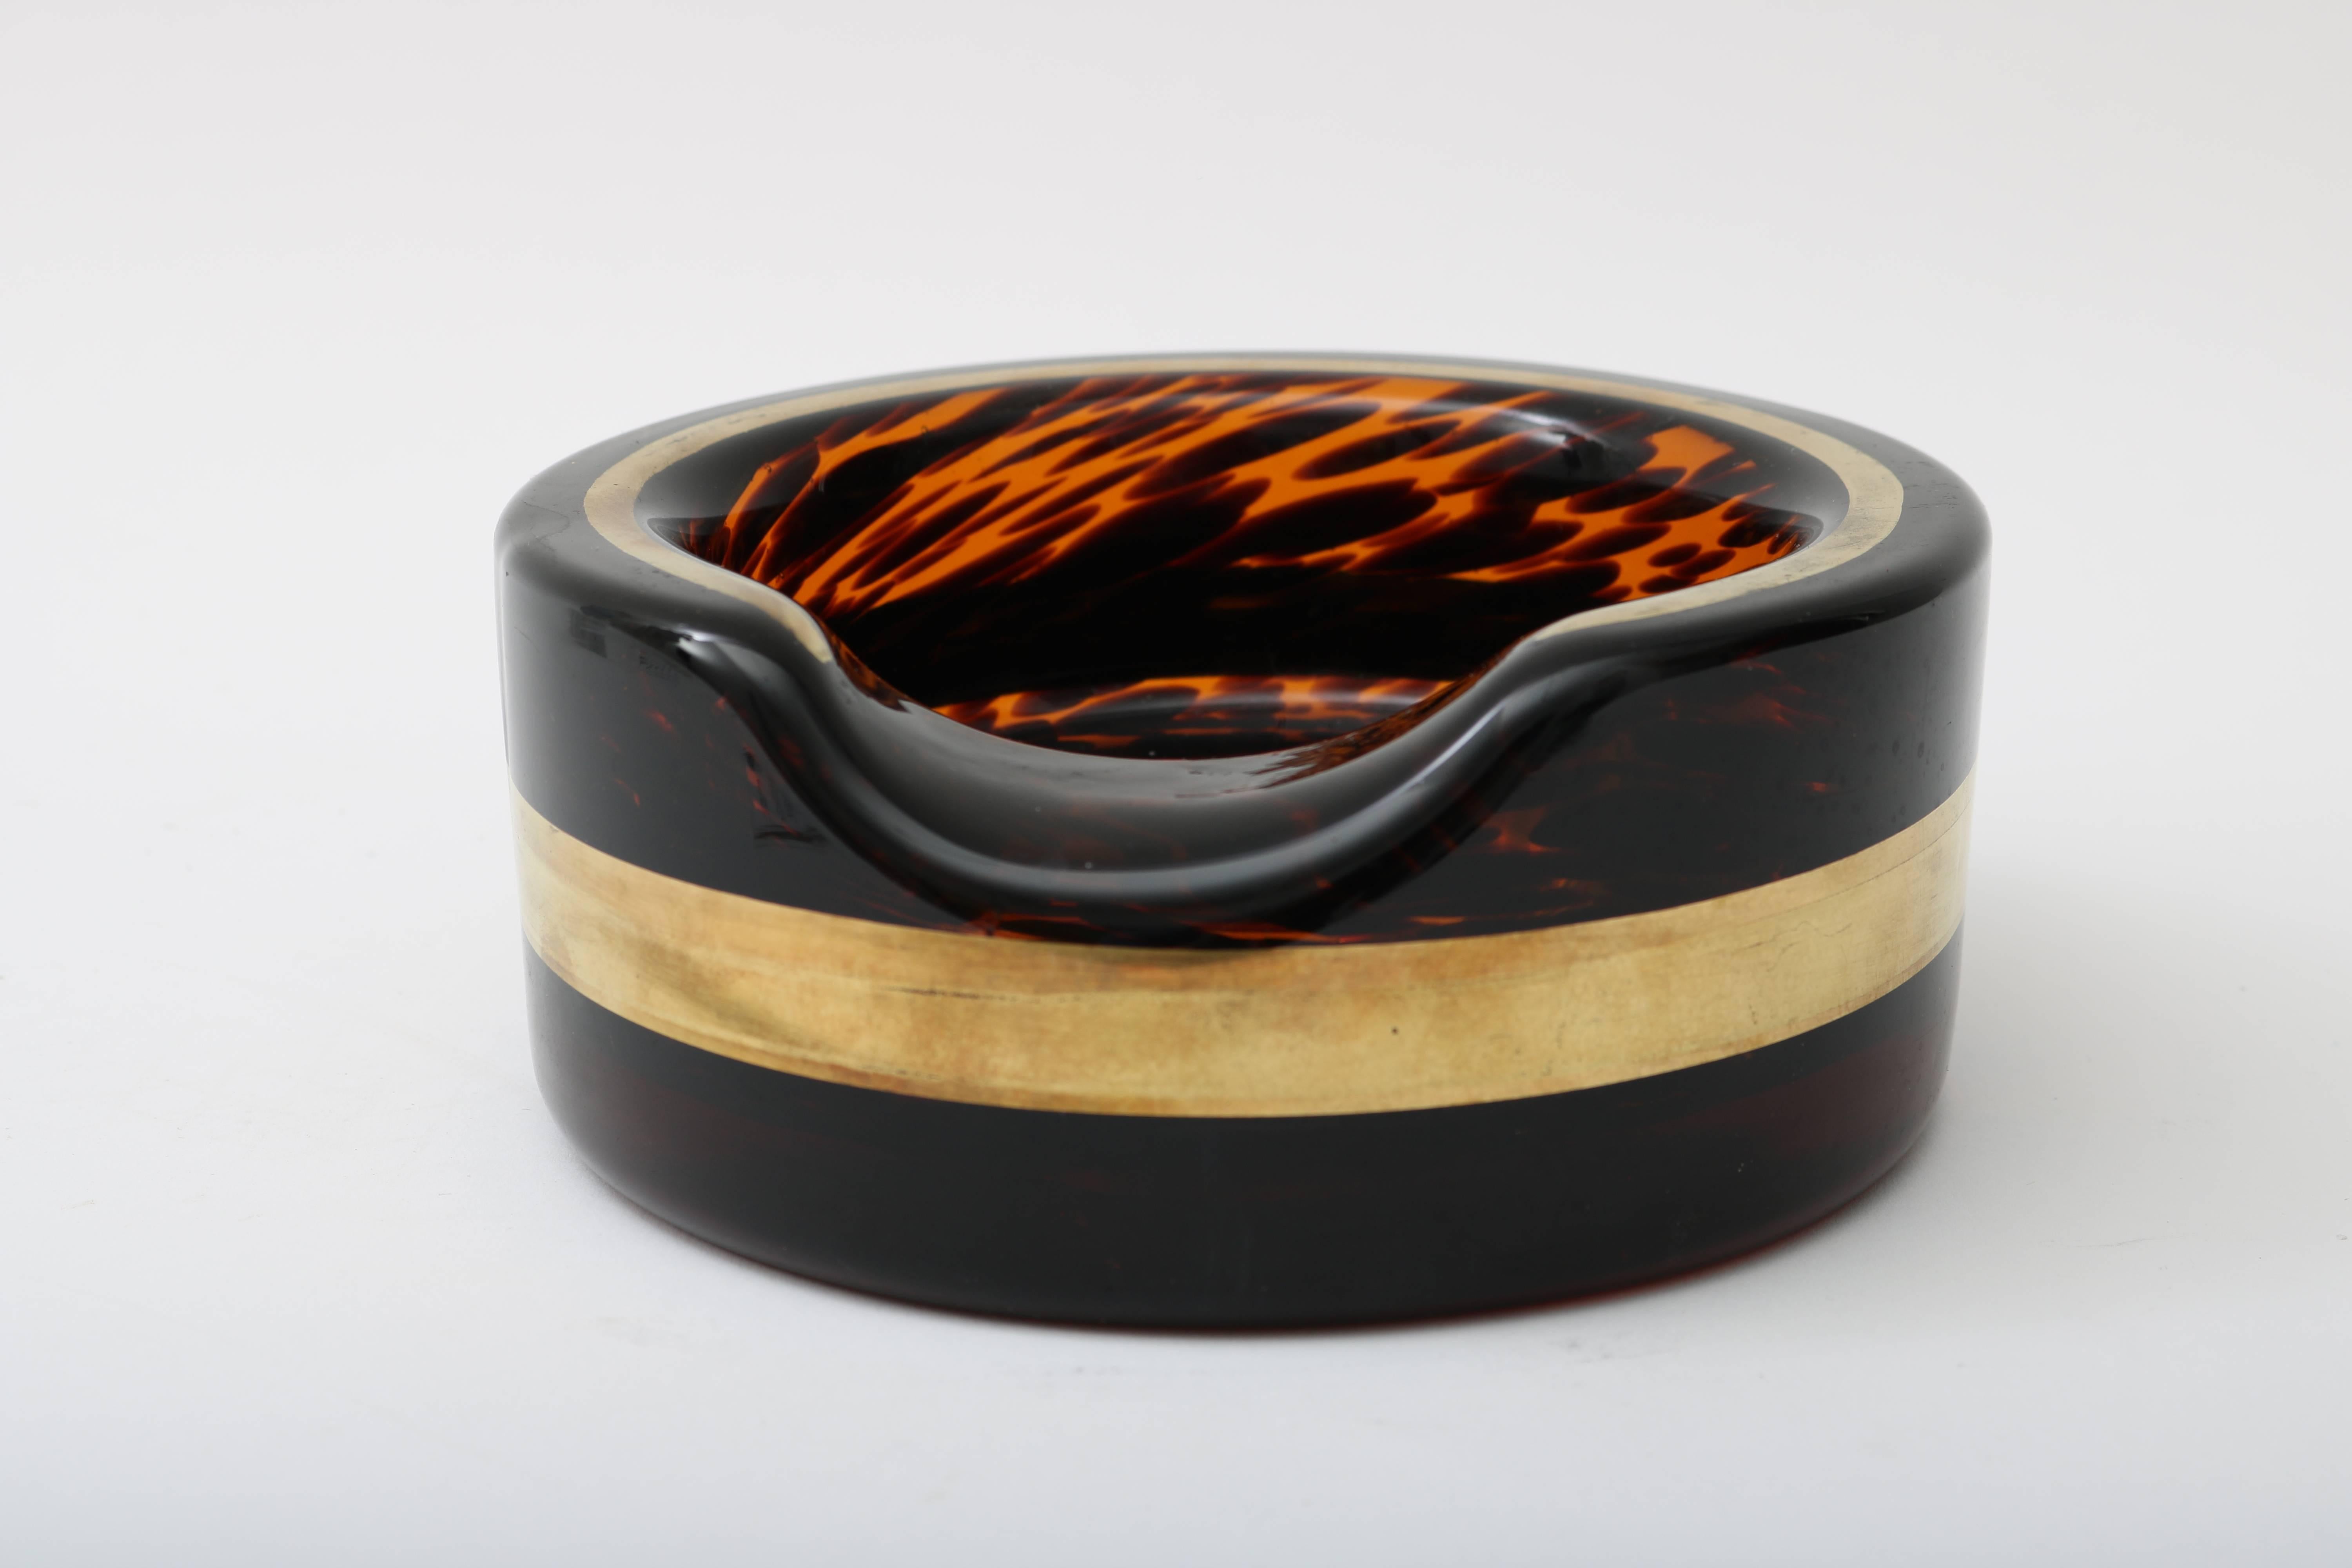 This stylish Murano glass cigar ashtray was fabricated in the 1970s and very much has the style of pieces created by Seguso for Karl Springer and Willy Rizzo. The tortoise pattern glass has a wonderful dark coloration which contrast well with the